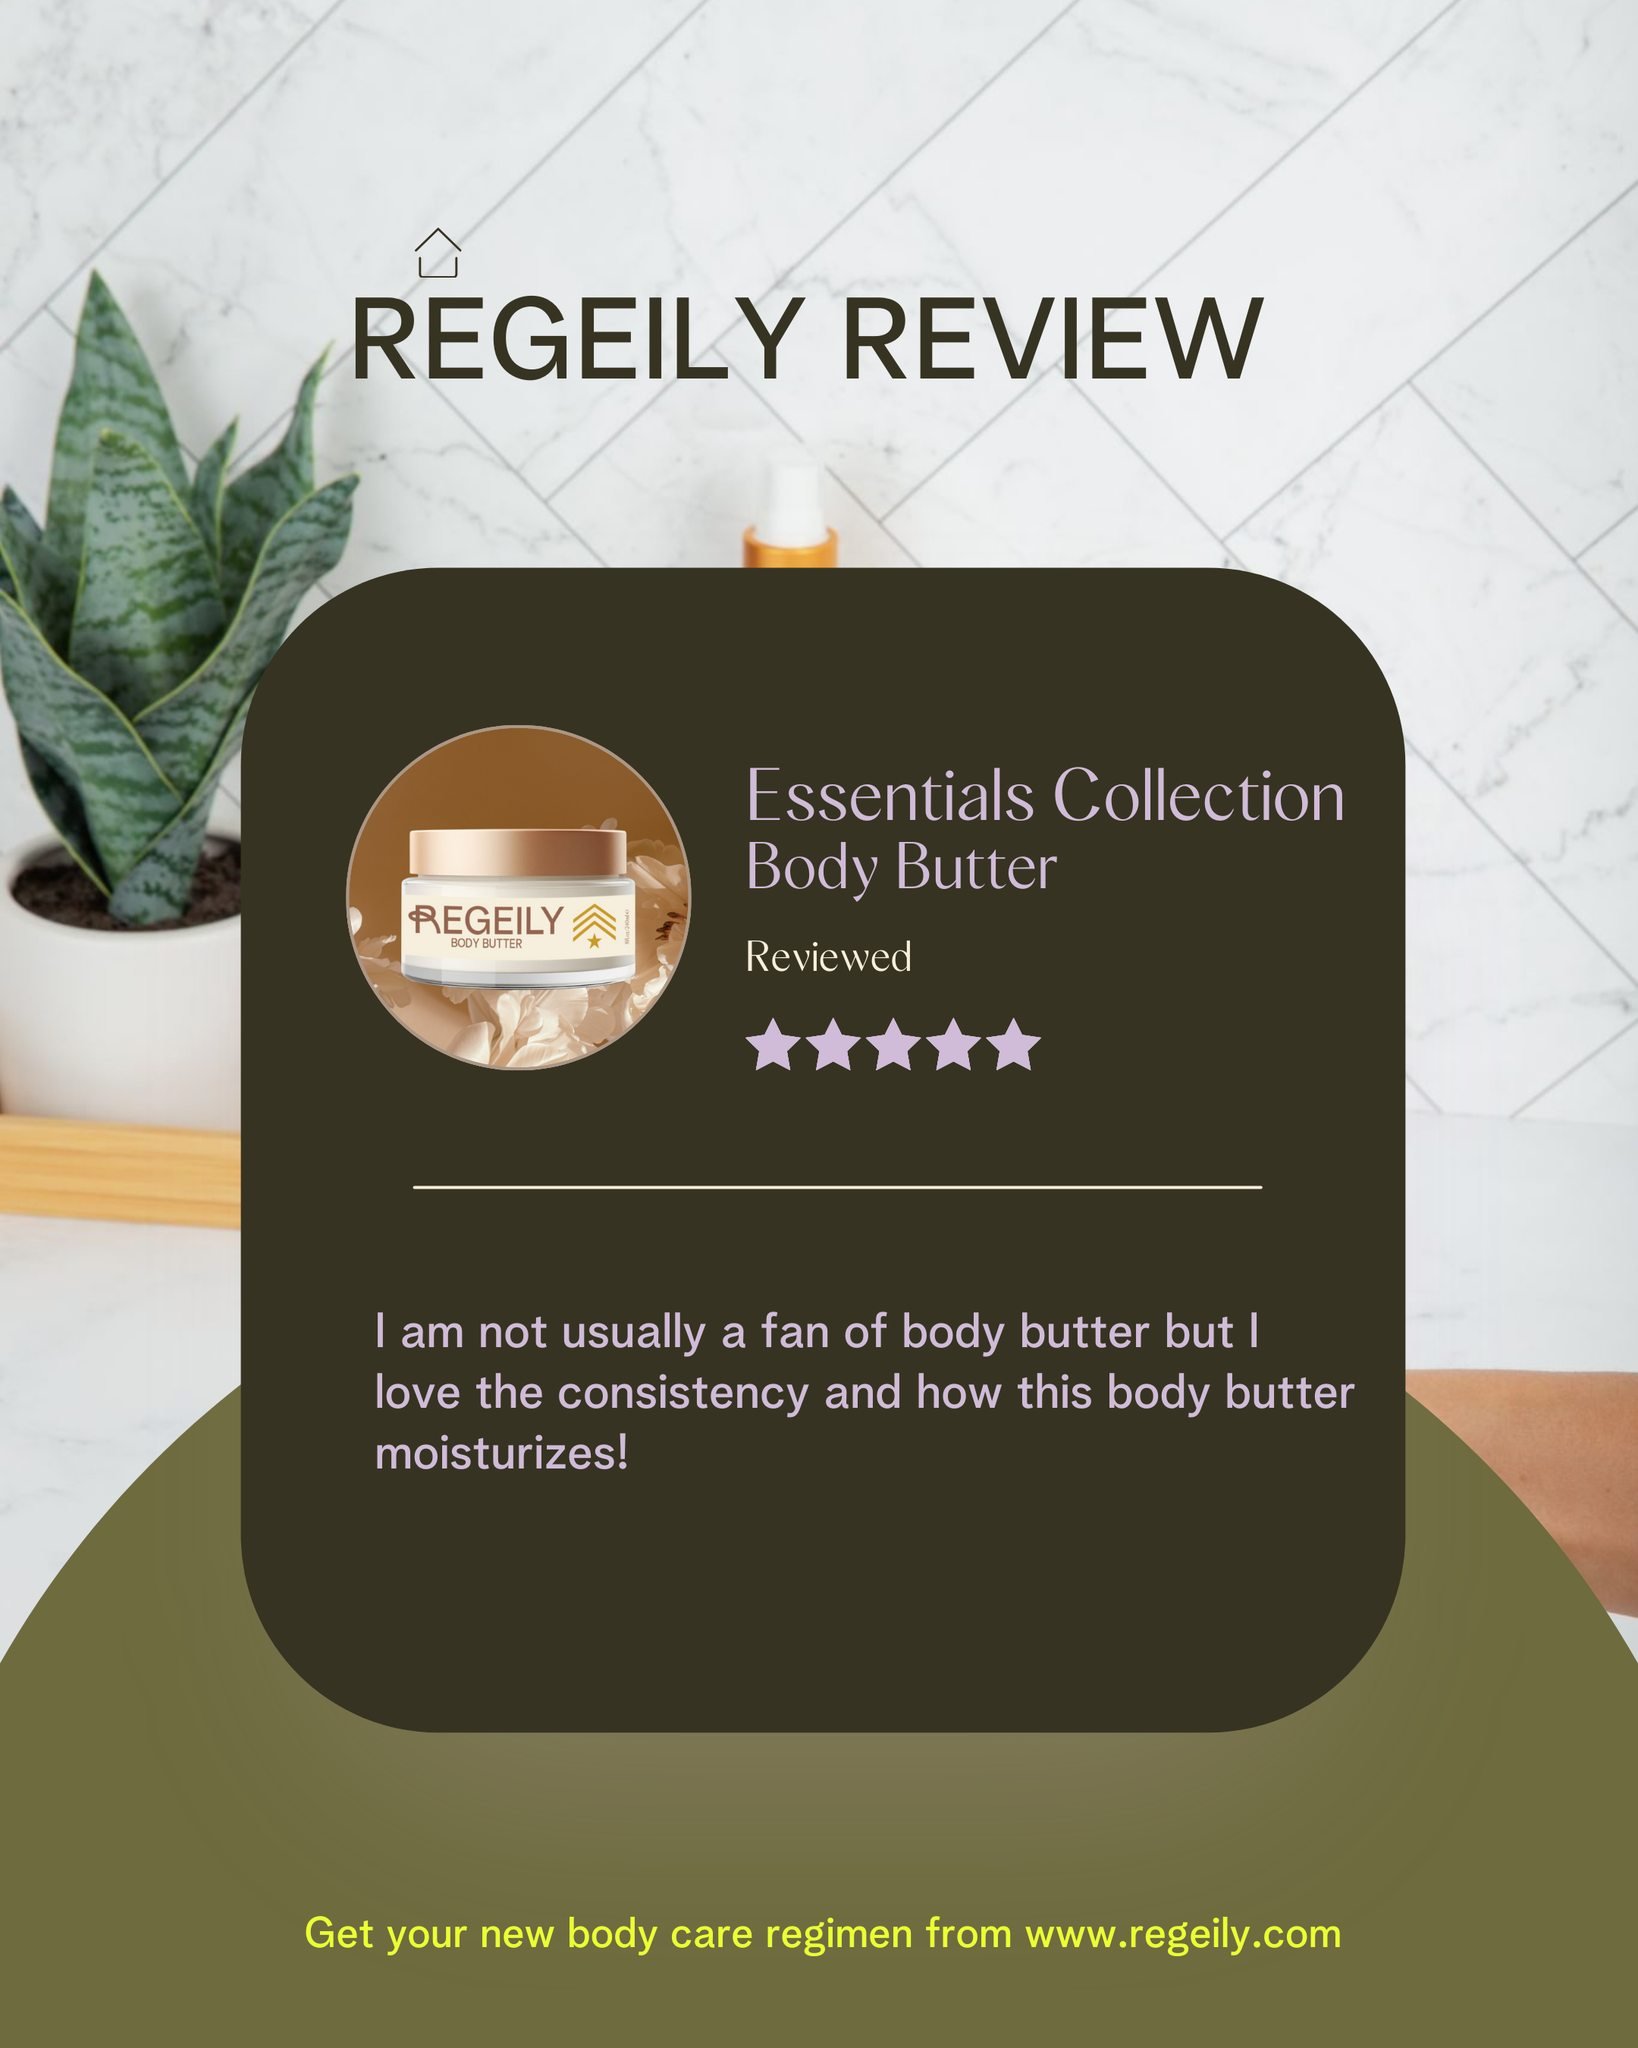 &quot;I am not usually a fan of body butter but I love the consistency and how this body butter moisturizes!&quot;

Can we make a fan out of you?!

Awaken your body with our Essentials Collection. The power of essential oils at its finest.

Step Thre